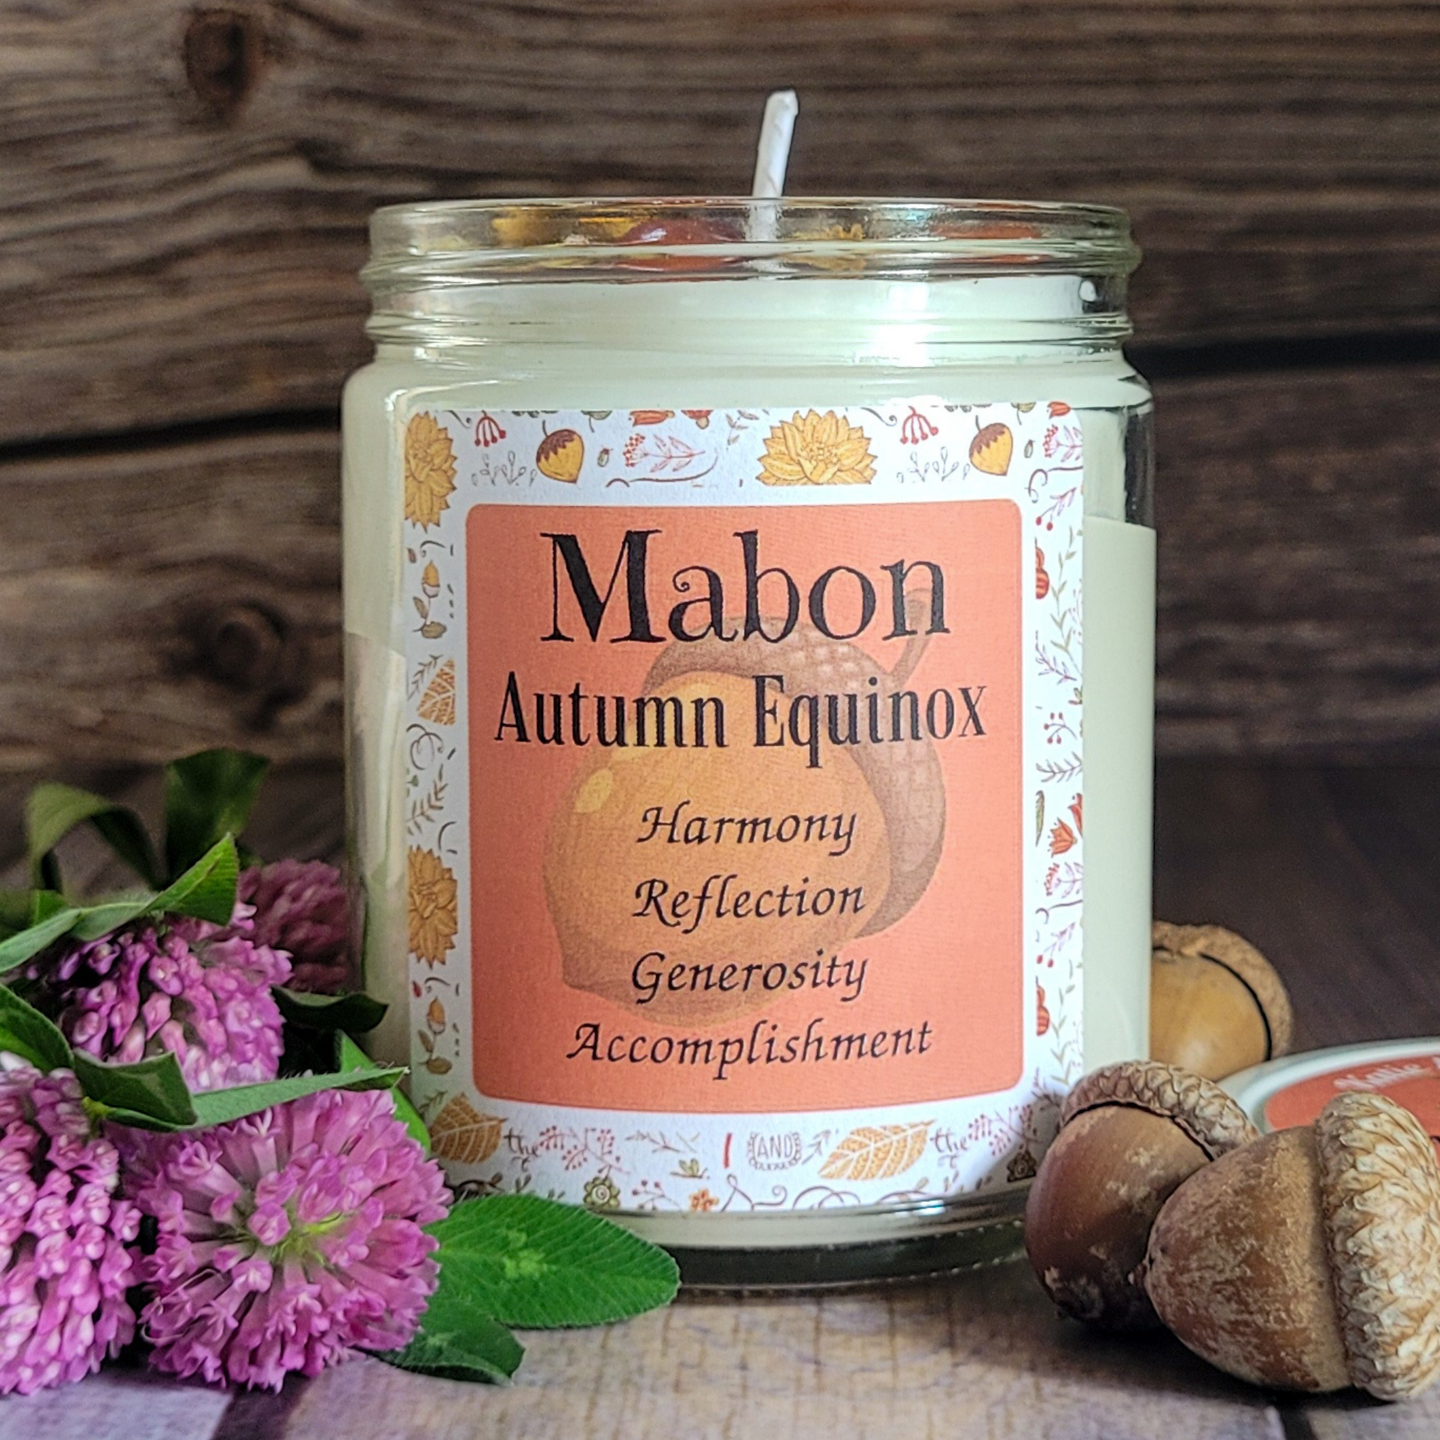 Soy wax candle for Mabon